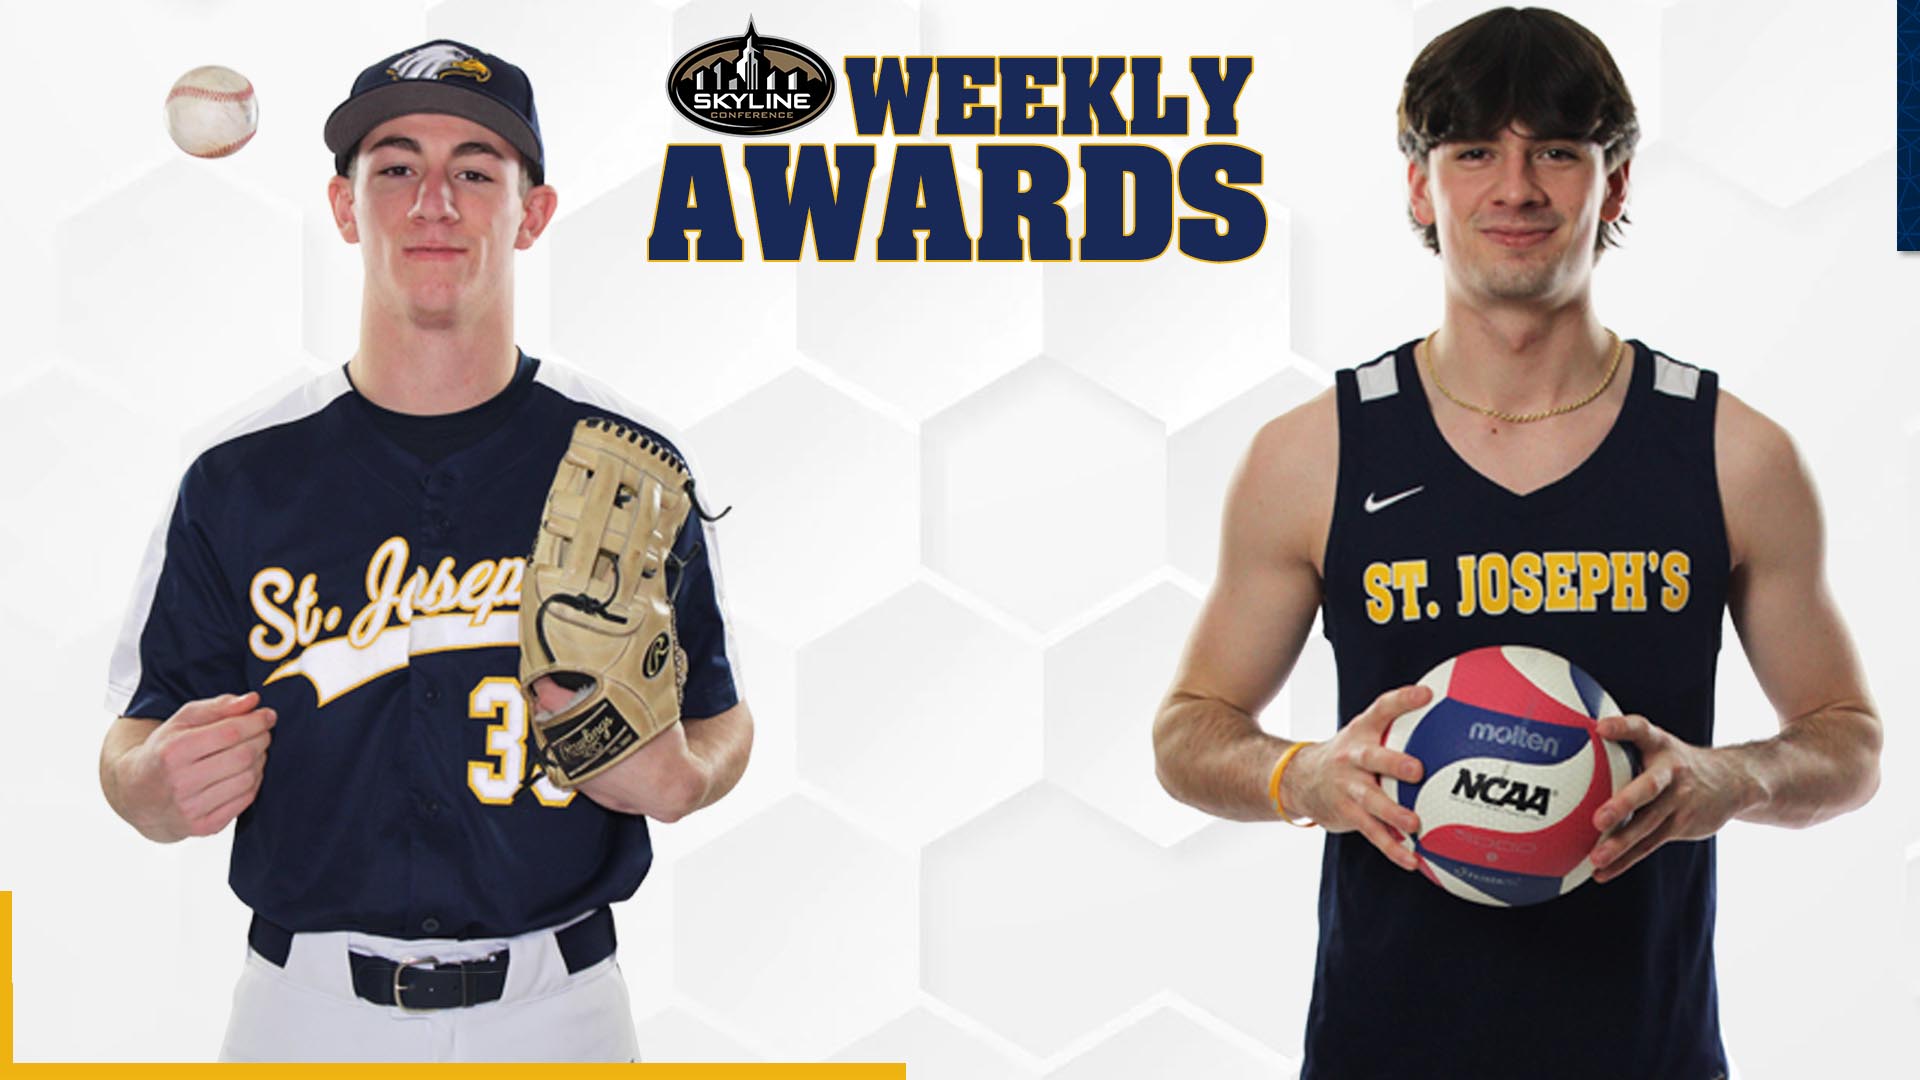 Krpata and MacPherson Earn Top Weekly Awards; Five Named to Honor Rolls